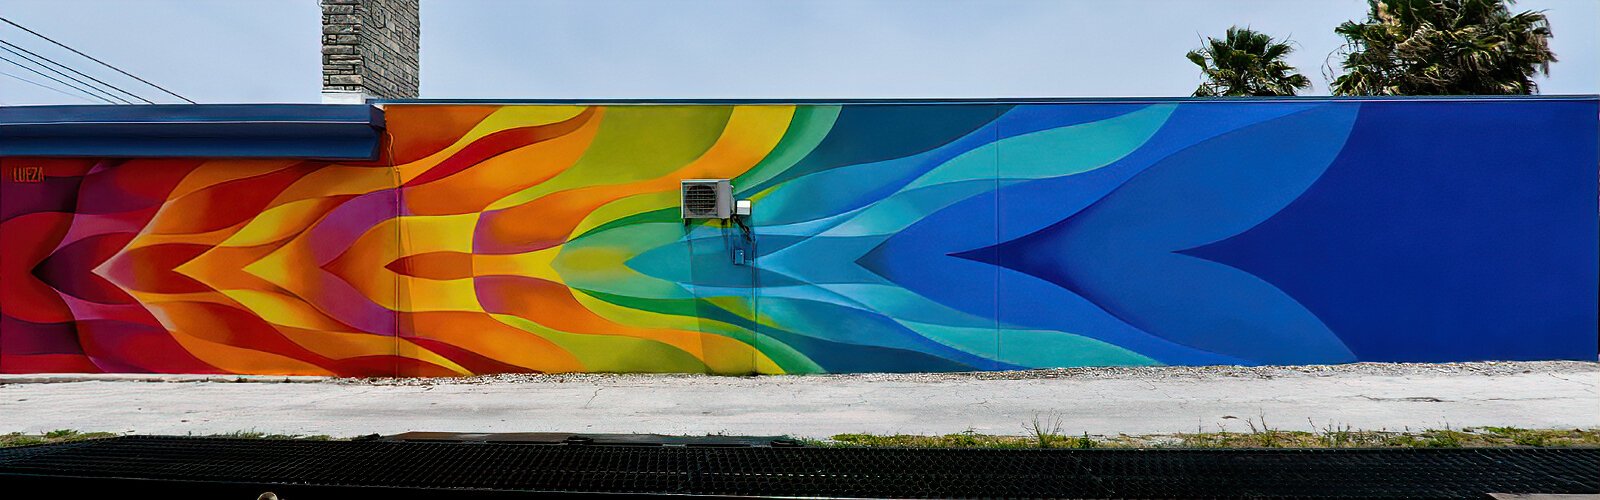 "Prismatic Rush” by Argentine-American artist Cecilia Lueza is an explosion of vivid colors on the side of Clear Track Recording Studios in Clearwater.